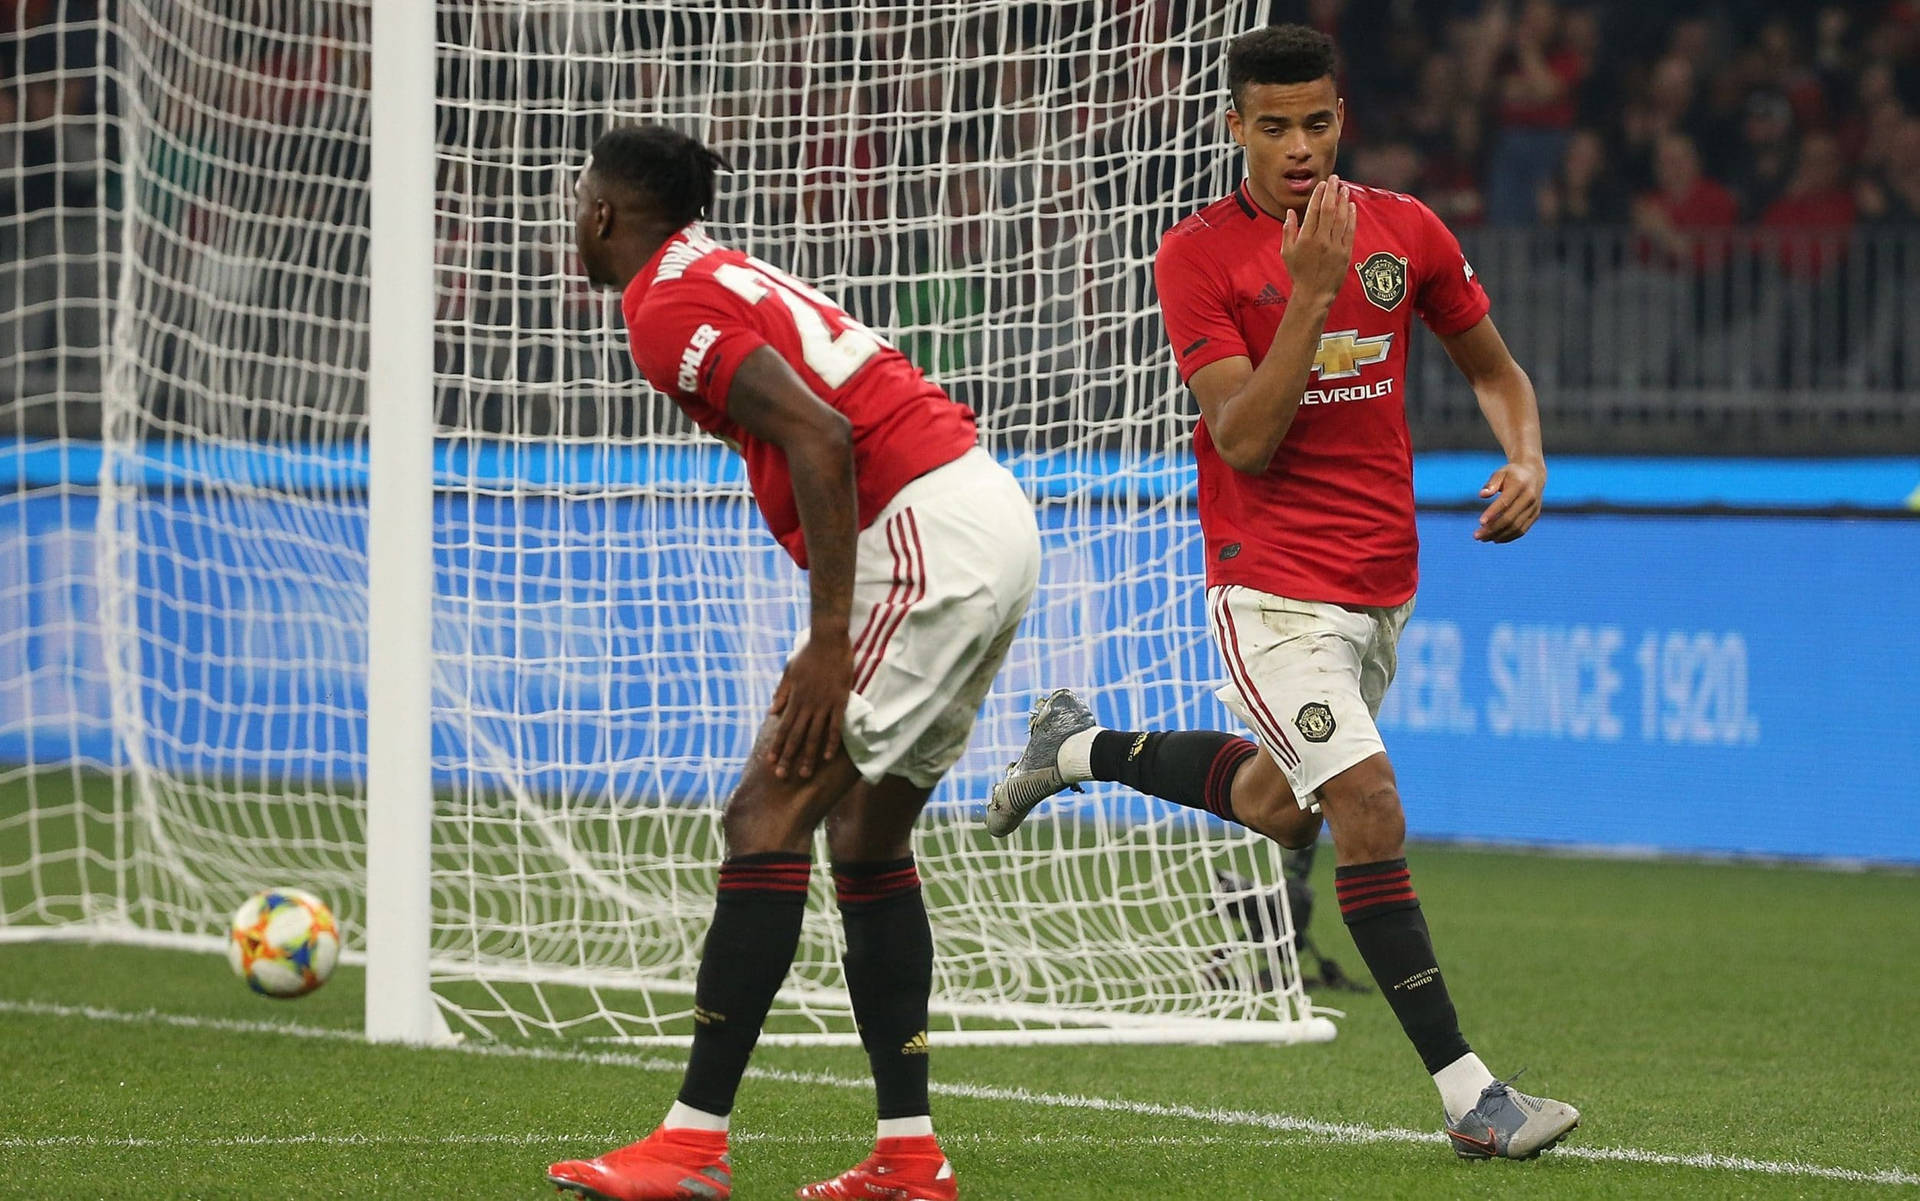 Masongreenwood Escaping Can Be Translated To 